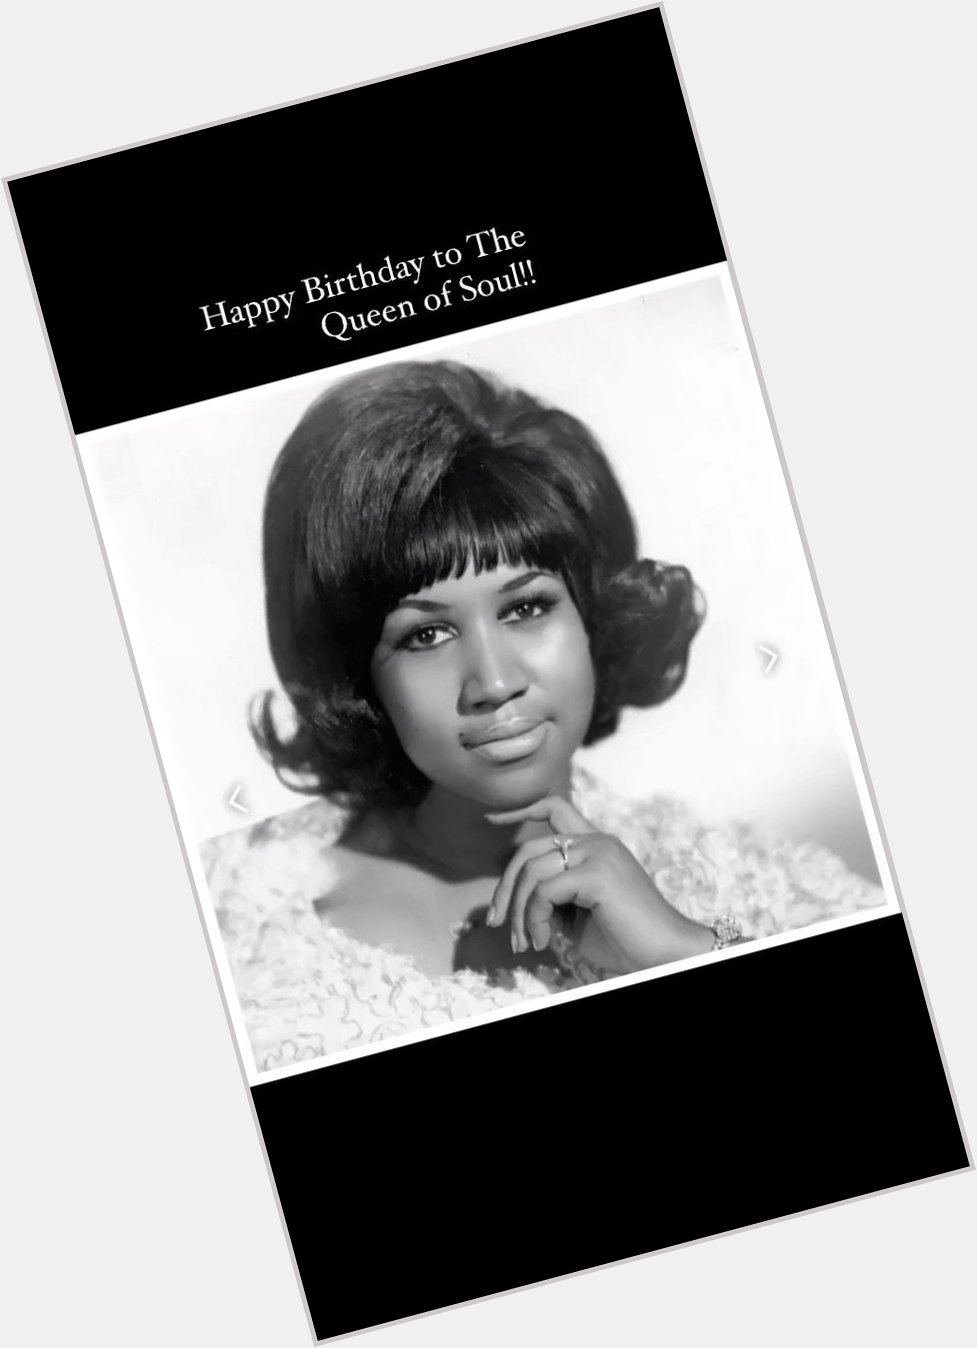 Happy Birthday to The Queen of Soul!!  Ms. Aretha Franklin!!  